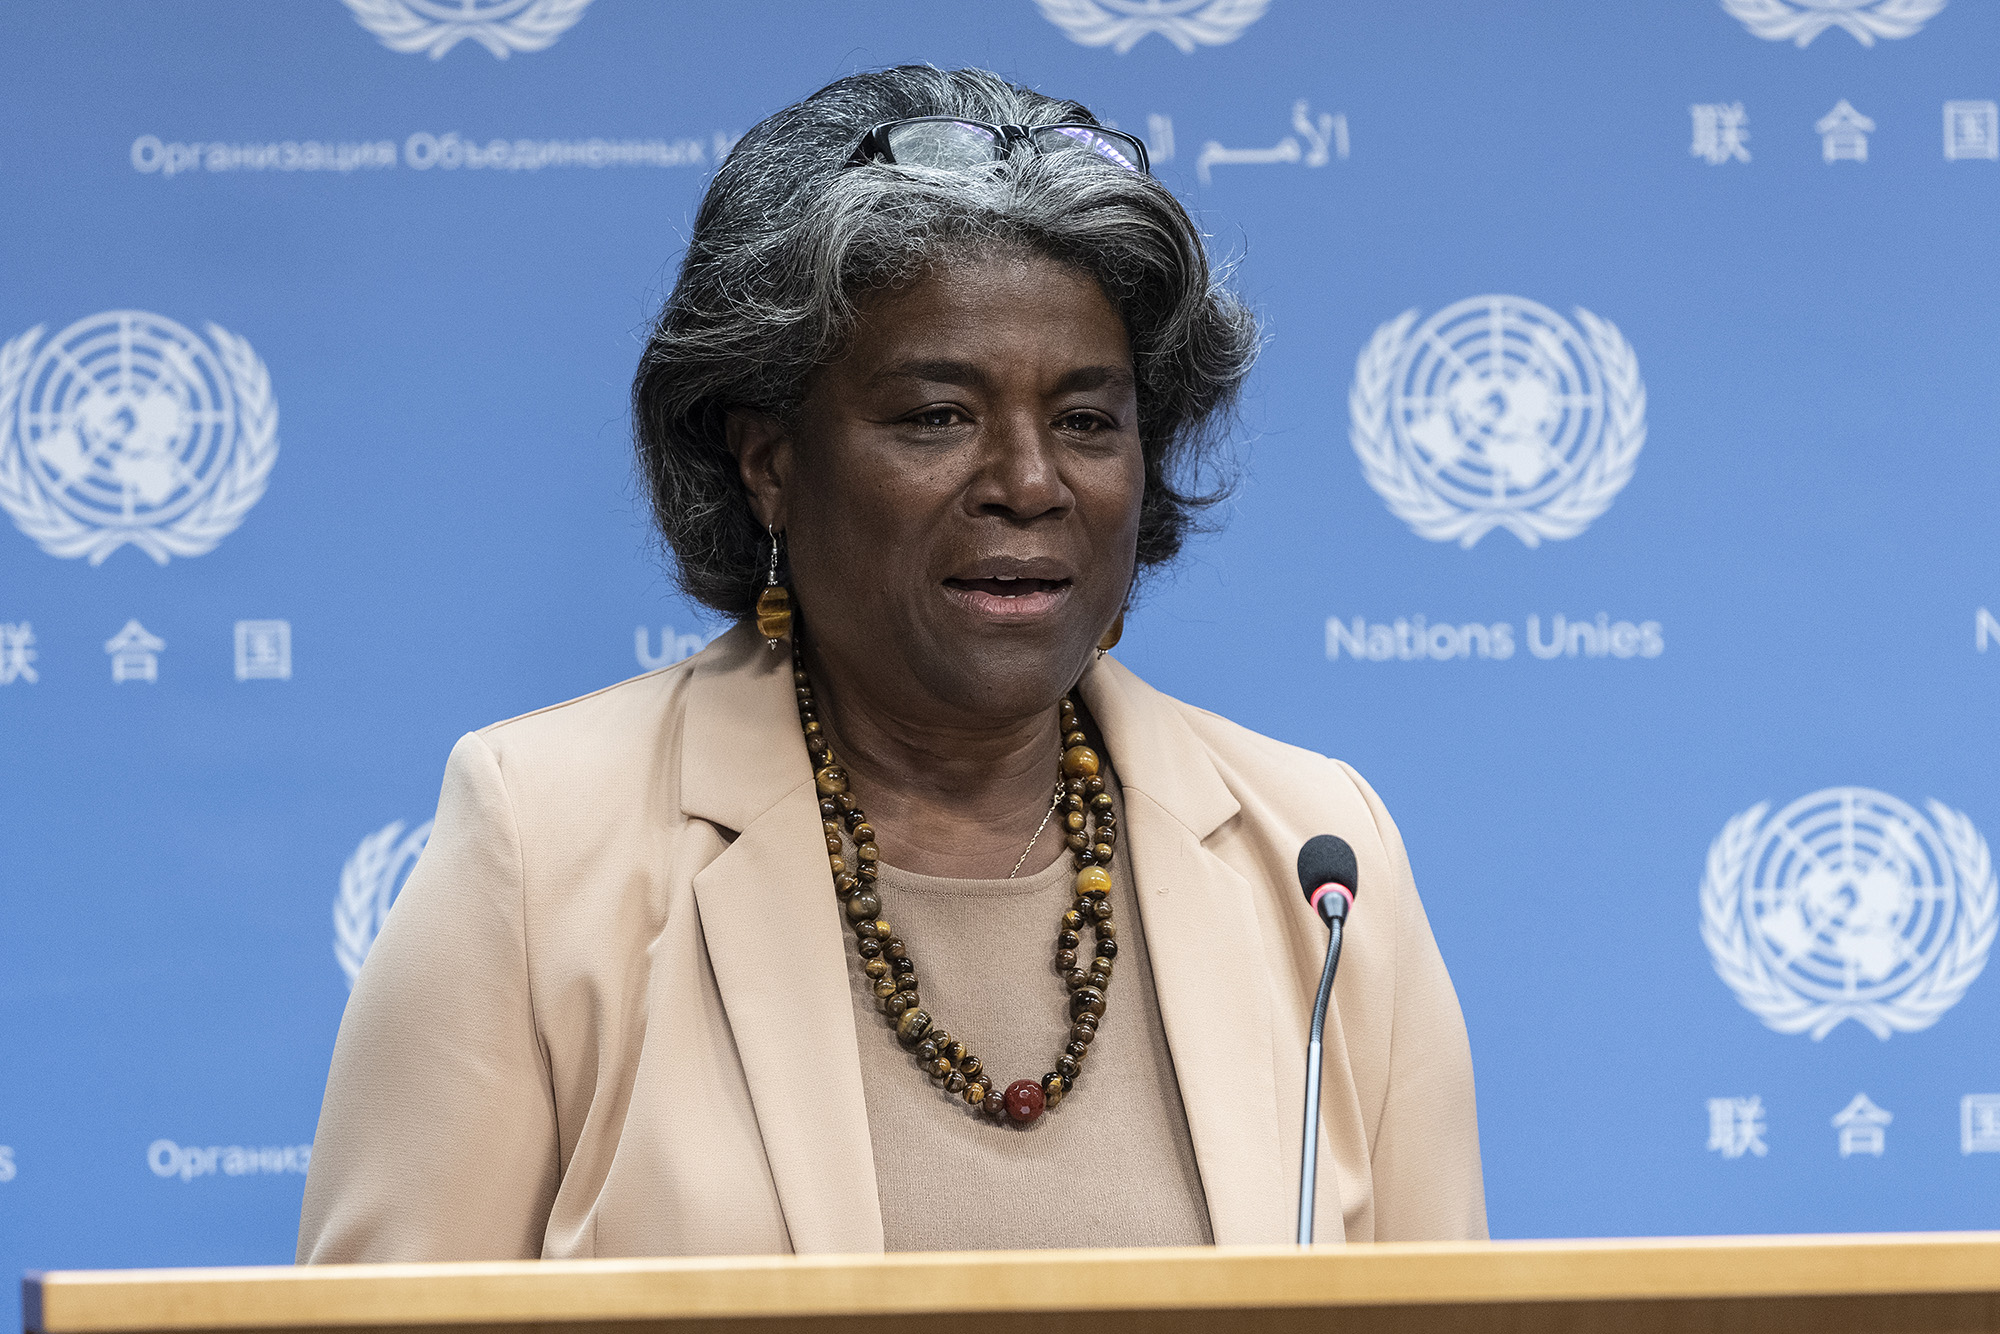 Press briefing by Ambassador Linda Thomas-Greenfield President of the Security Council for the month of May at UN Headquarters in New York on May 3.